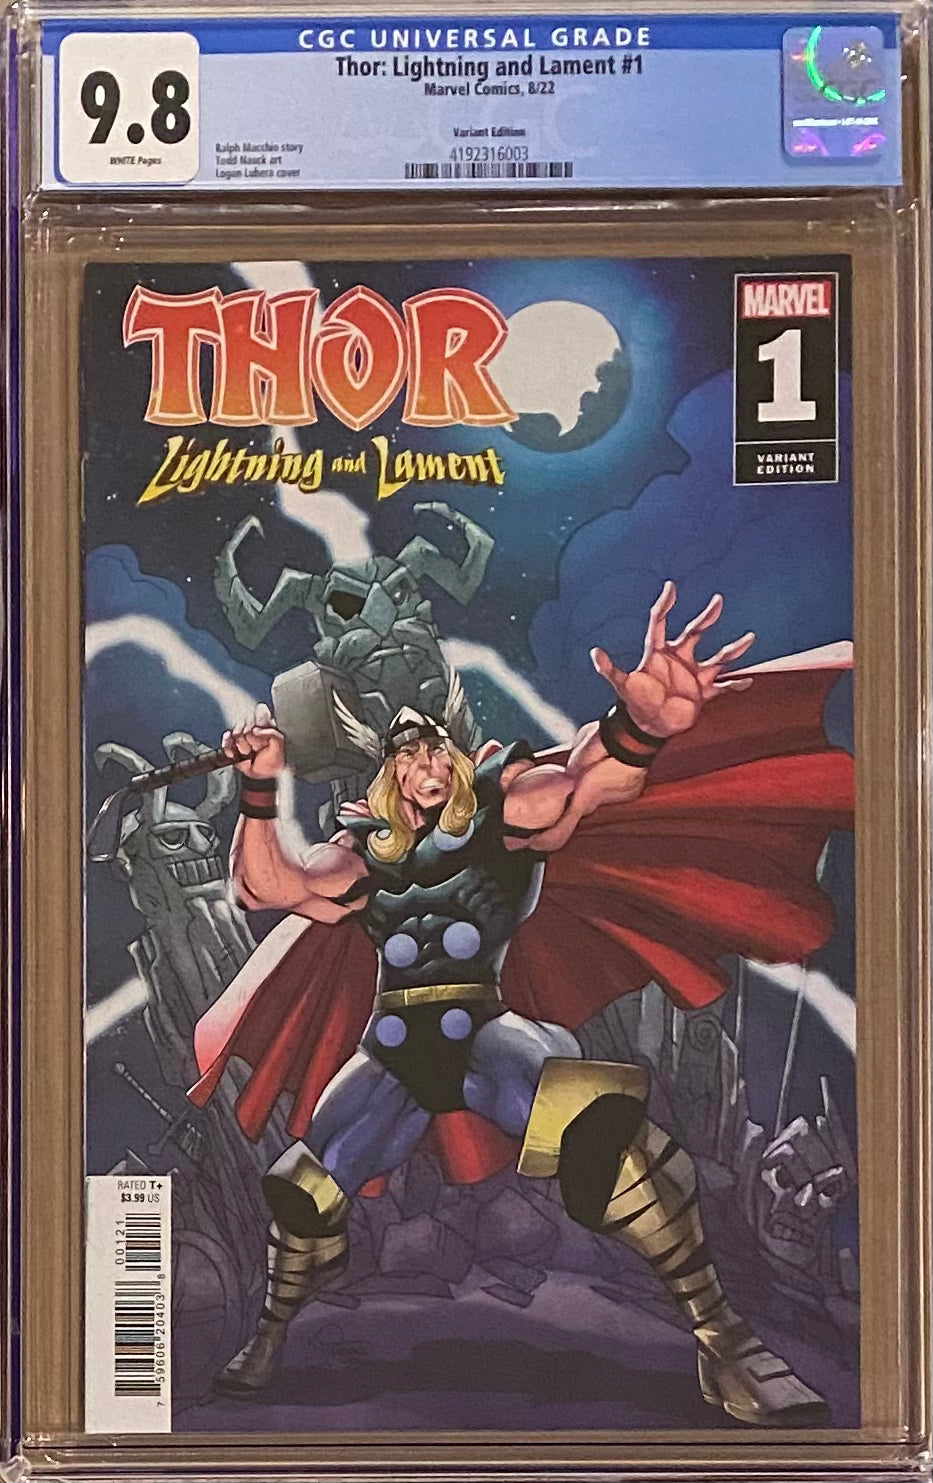 Thor: Lightning and Lament #1 Variant CGC 9.8